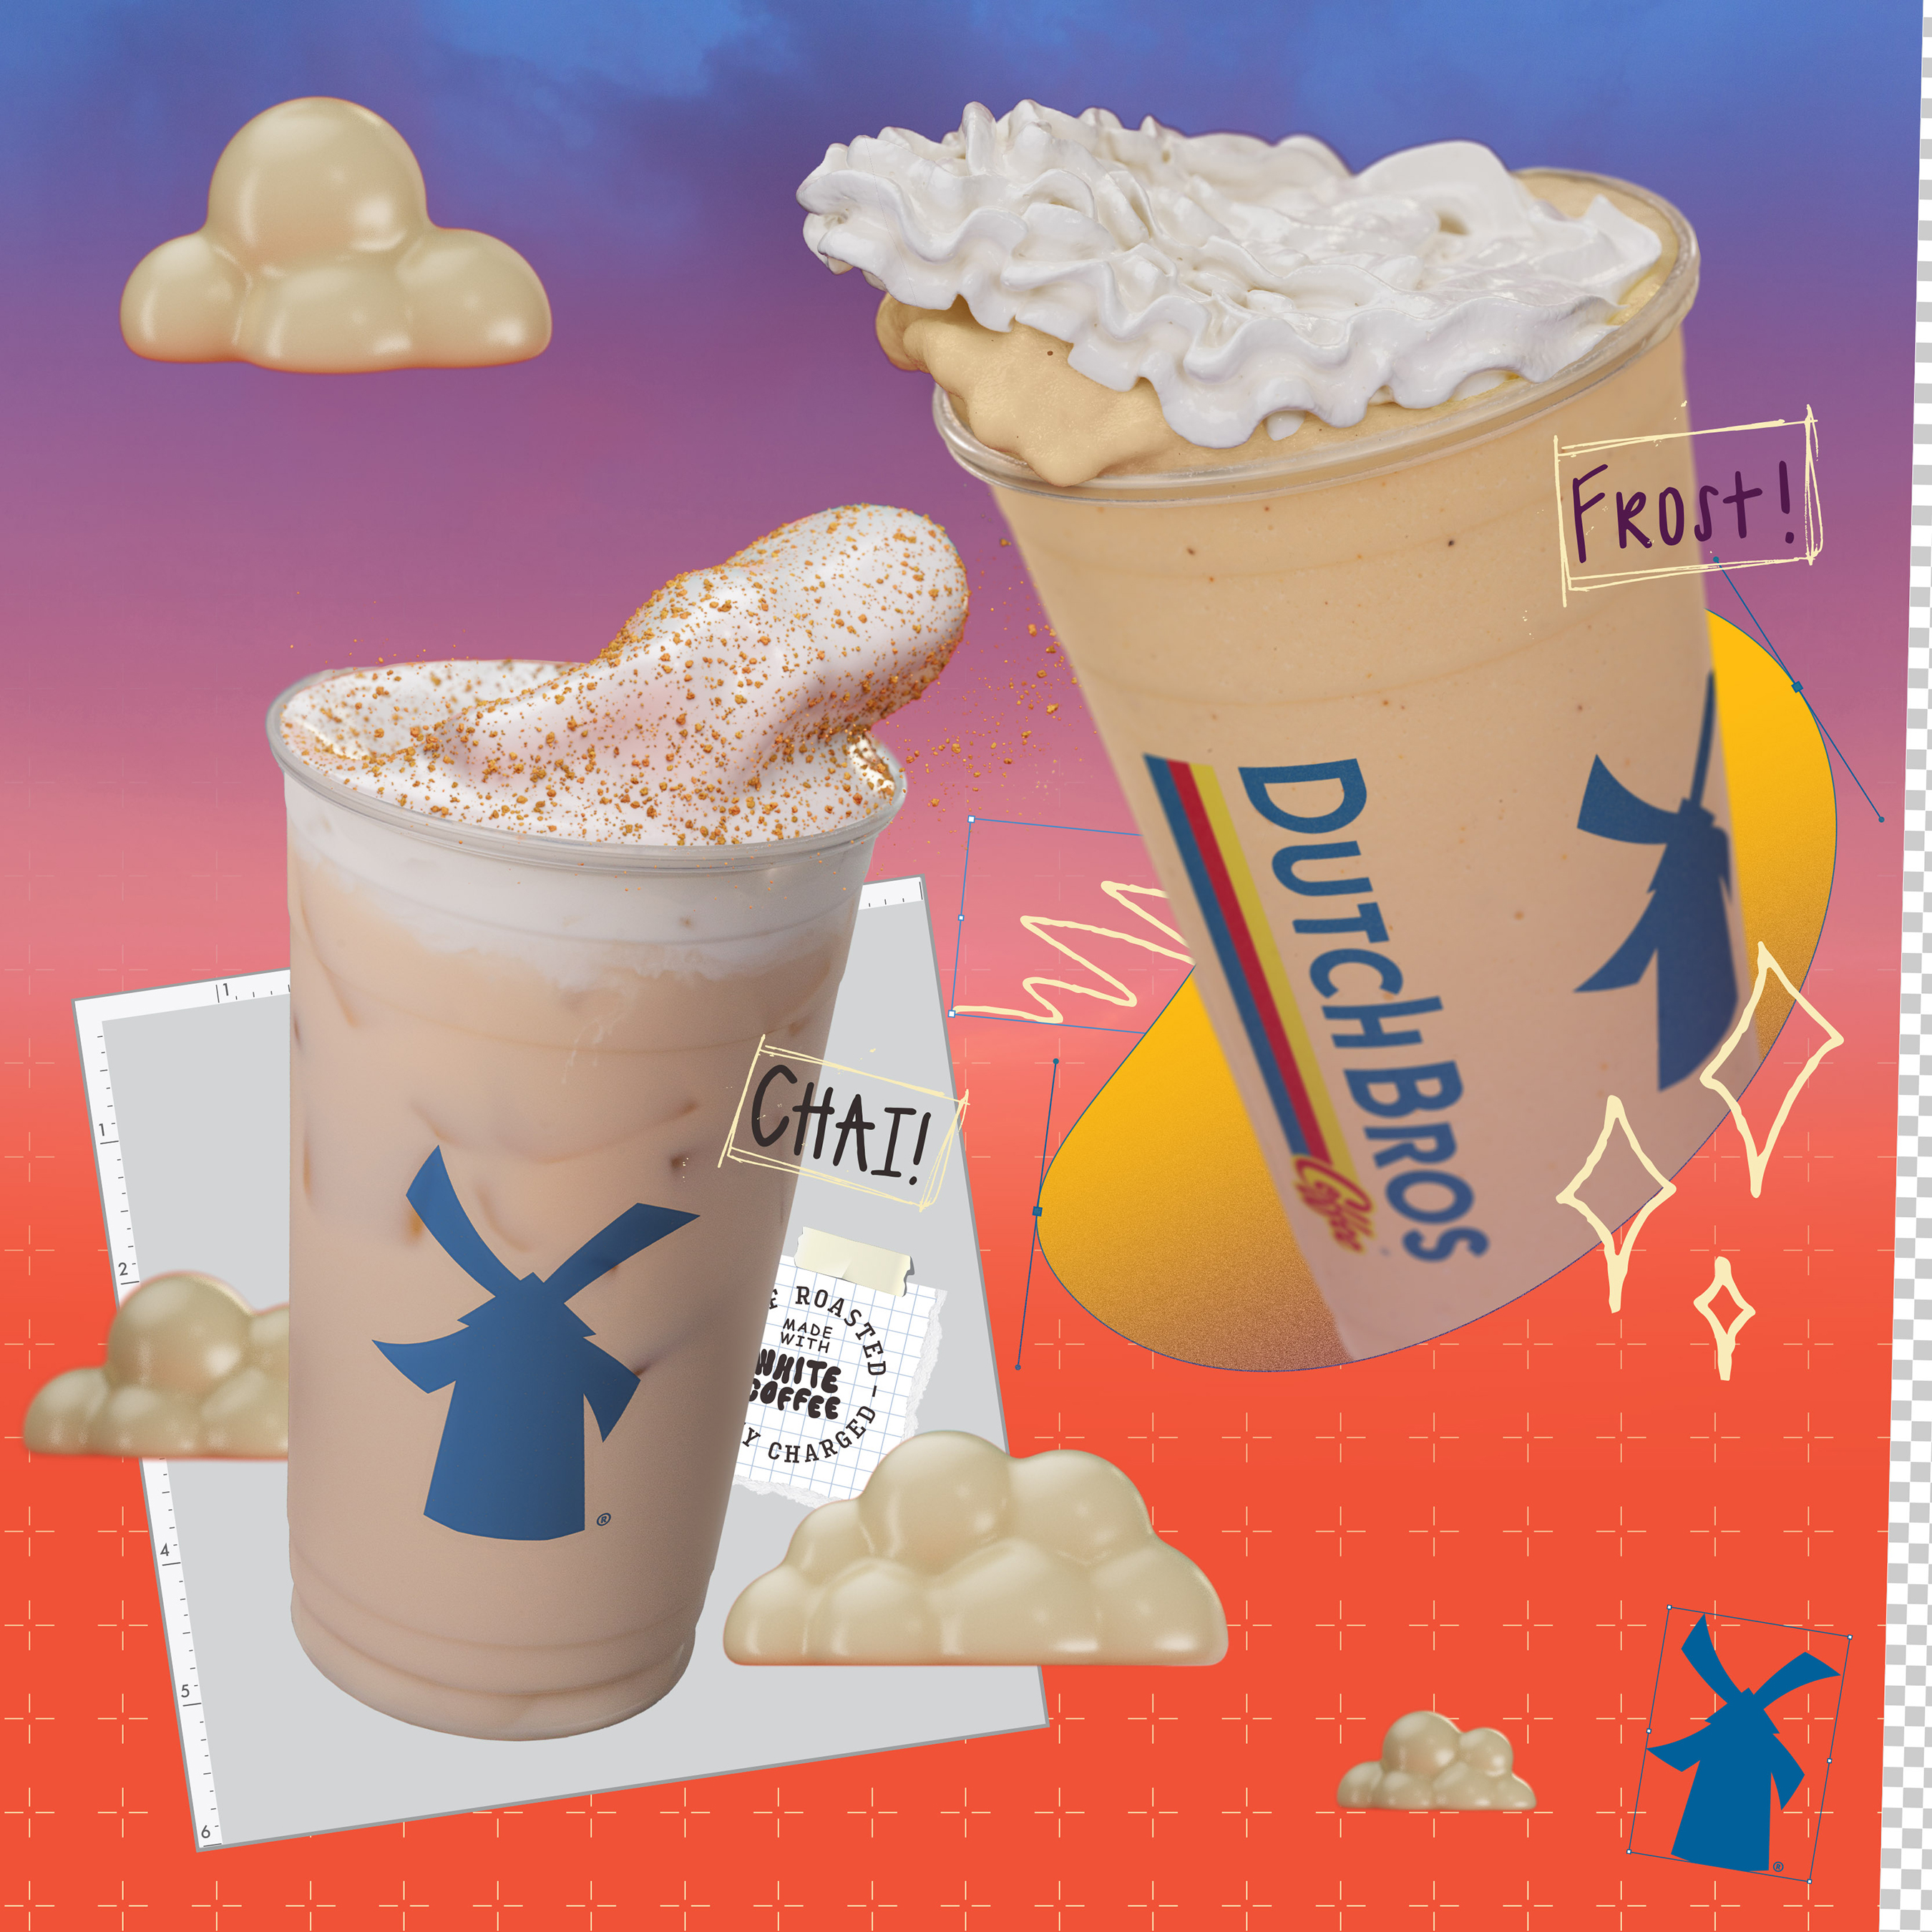 The Sweater Weather Chai features Dutch Bros Chai, a double shot of white coffee and white chocolate topped with Soft Top and cinnamon sprinks. The Pumpkin Pie Frost features pumpkin flavor in a frost (Dutch Bros’ version of a milkshake) and topped with whipped cream.